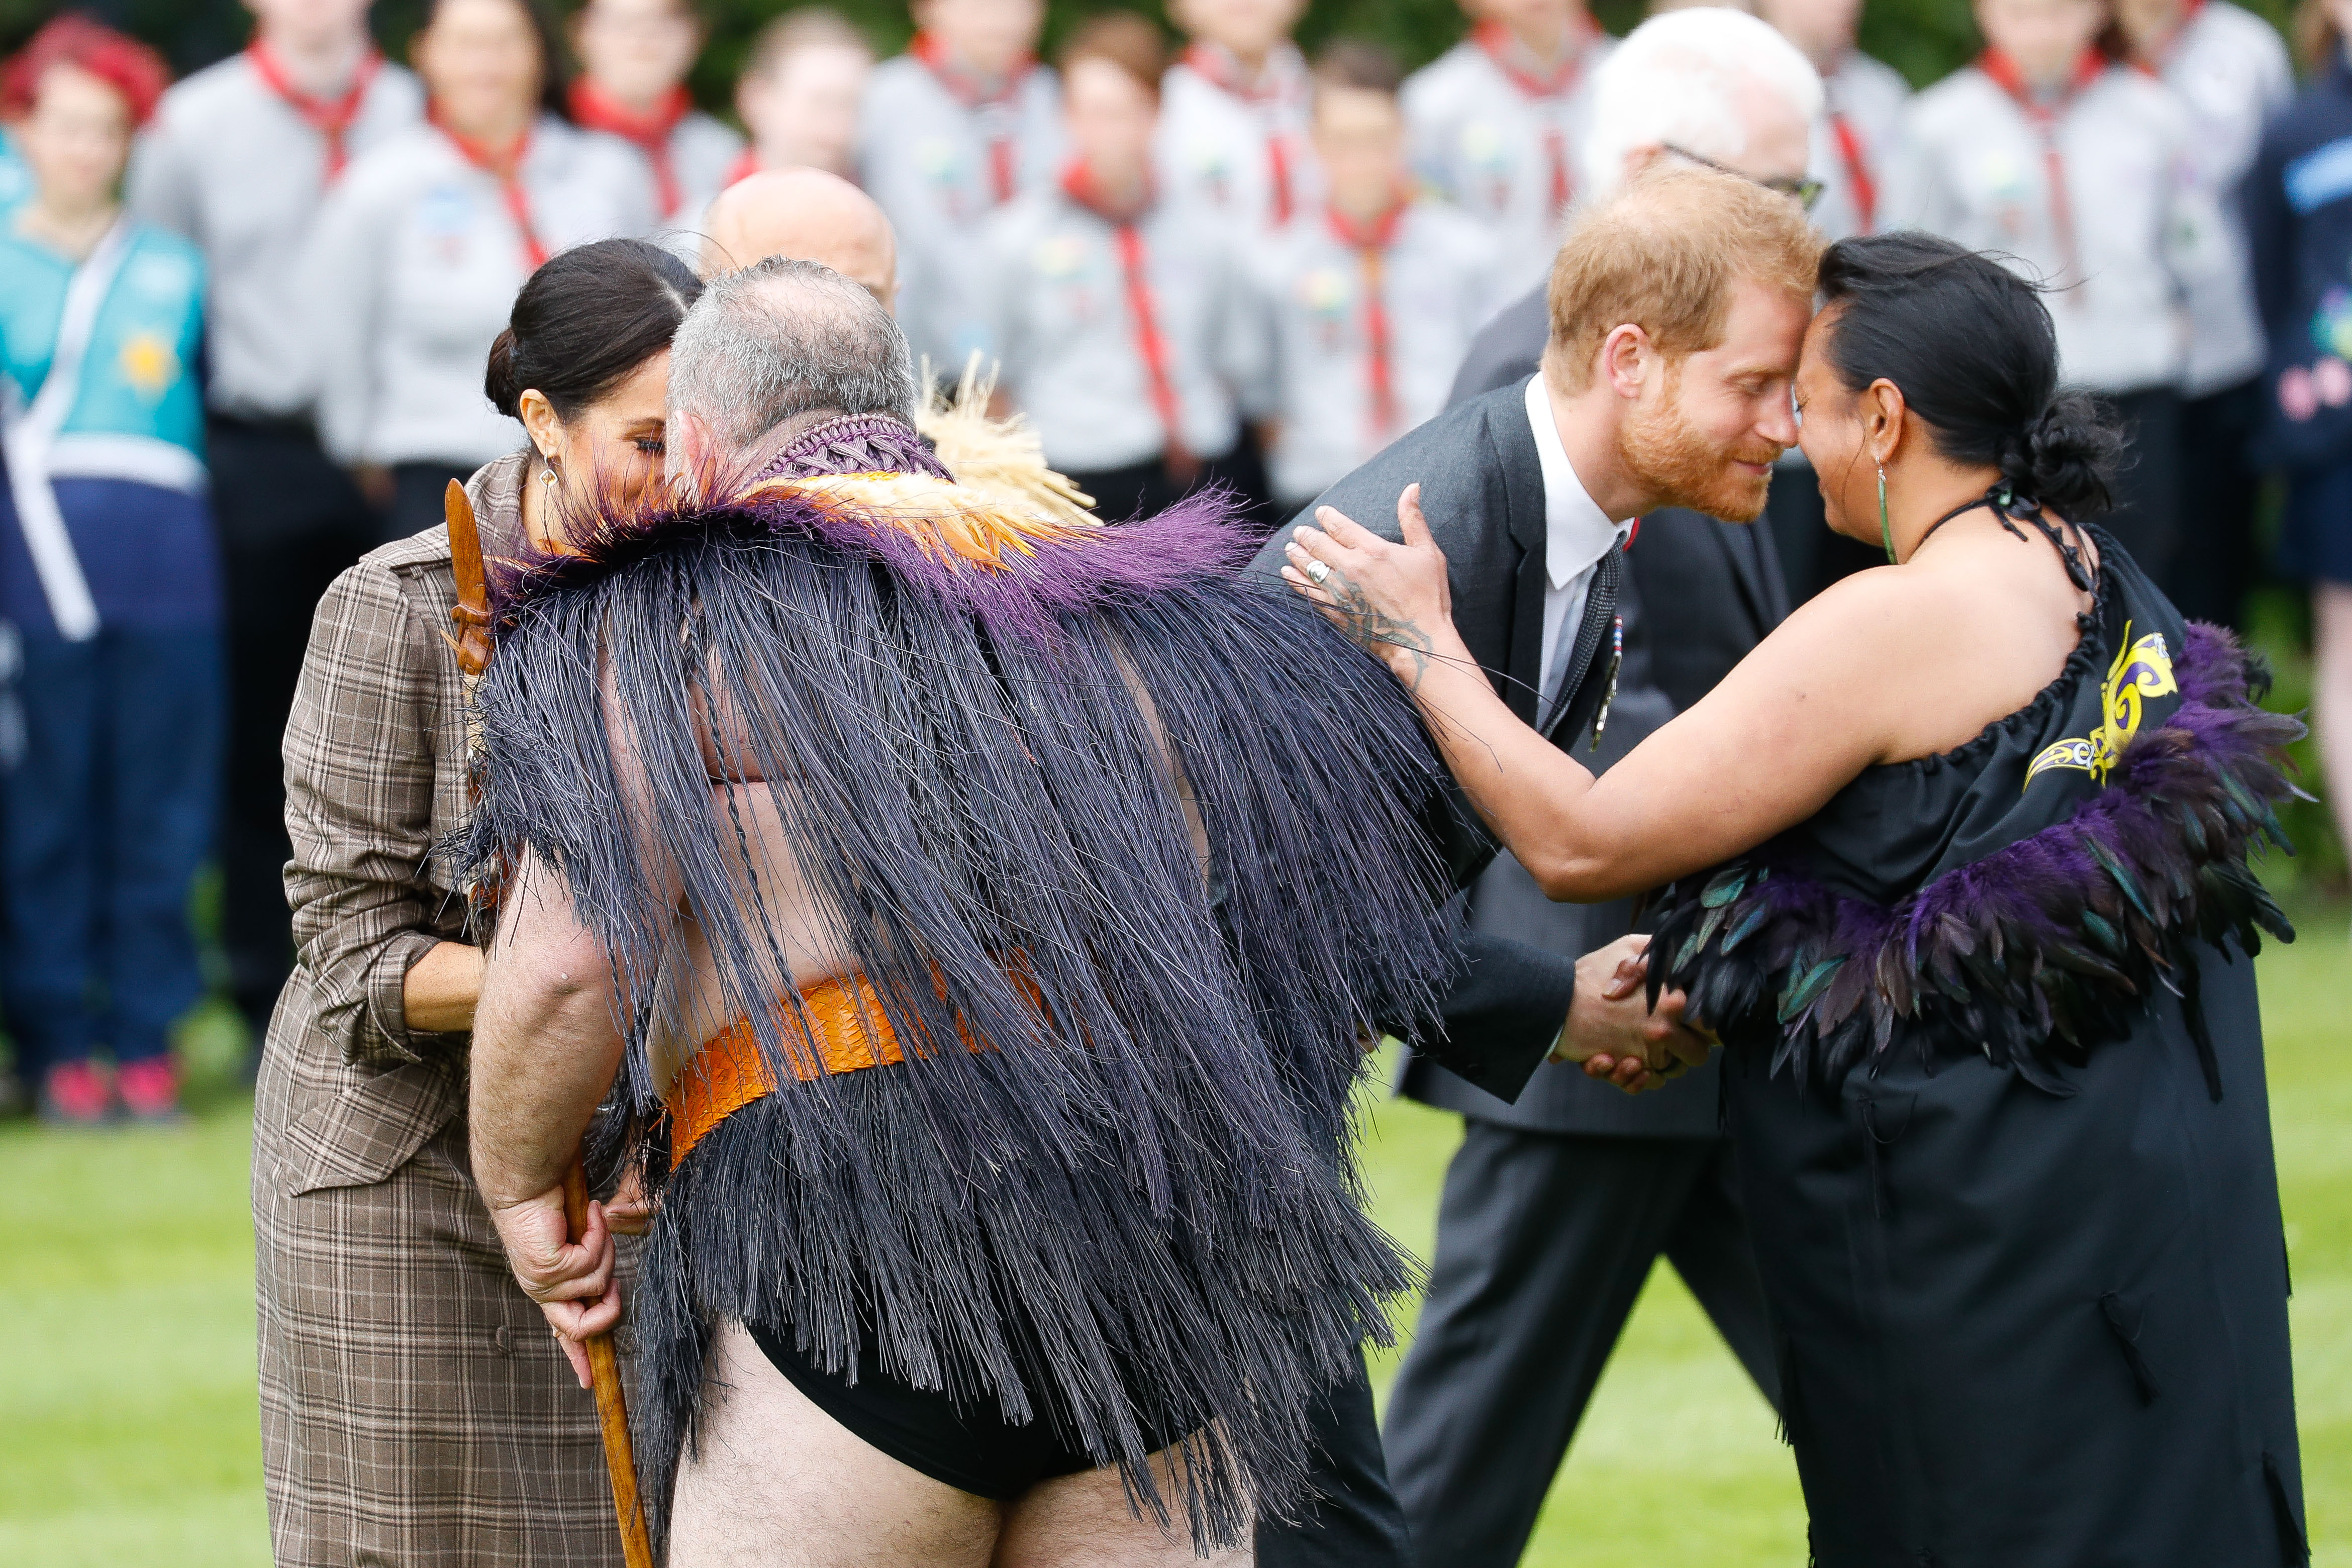 WELLINGTON, NEW ZEALAND - OCTOBER 28: Prince Harry, Duke of Sussex and Meghan, Duchess of Sussex greeting the performers with a traditional Hongi greeting at the Gorvernment House for the official arrival on October 28, 2018 in Wellington, New Zealand. The Duke and Duchess of Sussex are on their official 16-day Autumn tour visiting cities in Australia, Fiji, Tonga and New Zealand. (Photo by Chris Jackson/Getty Images)